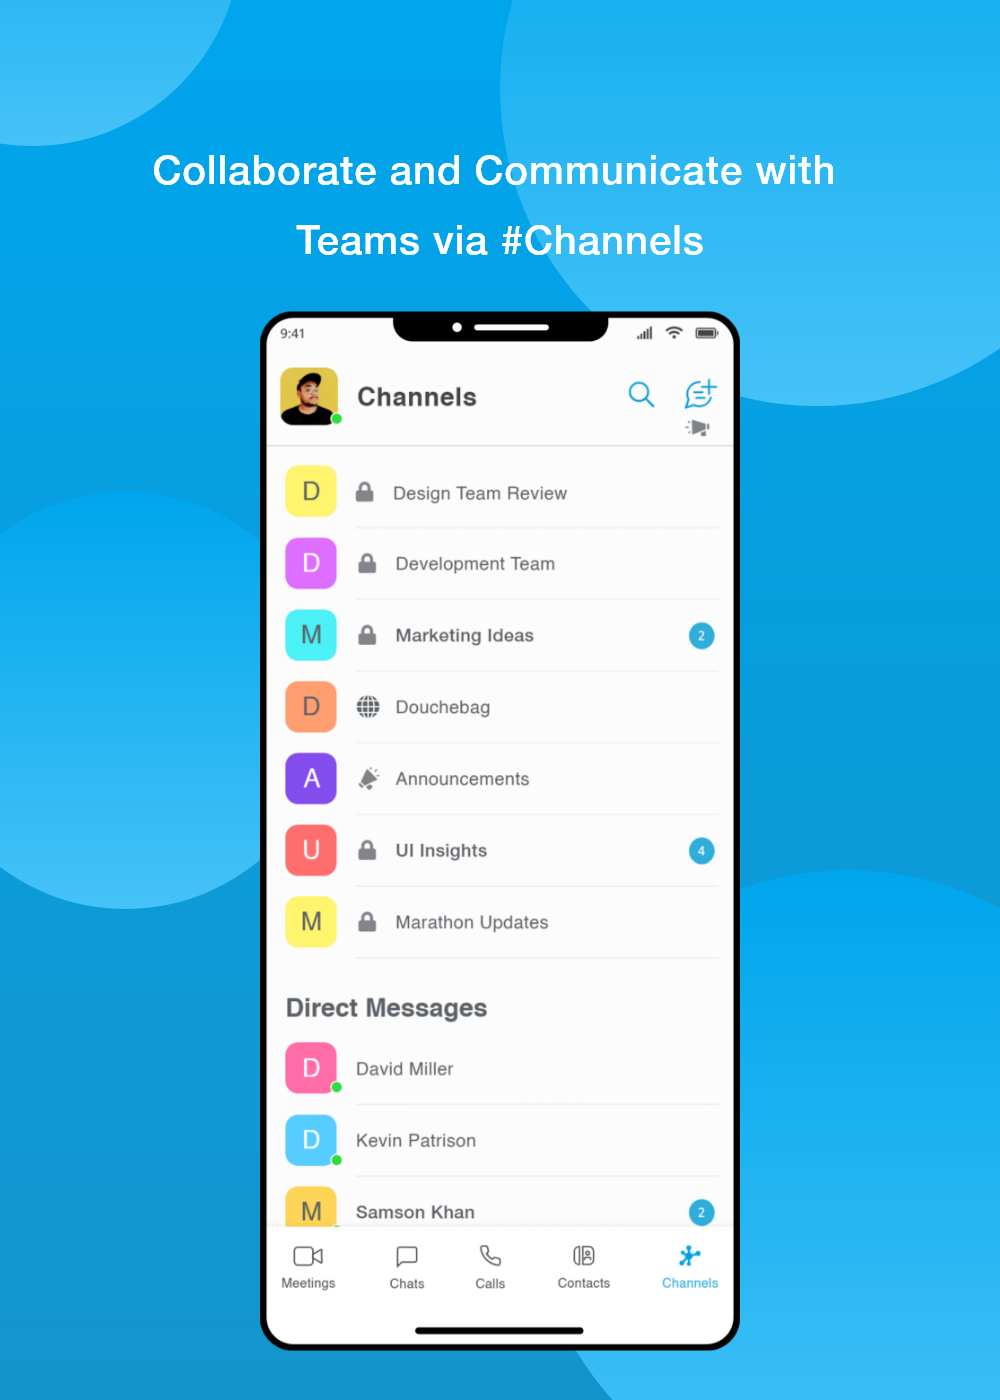 Collaborate and communicate with Teams via Channels